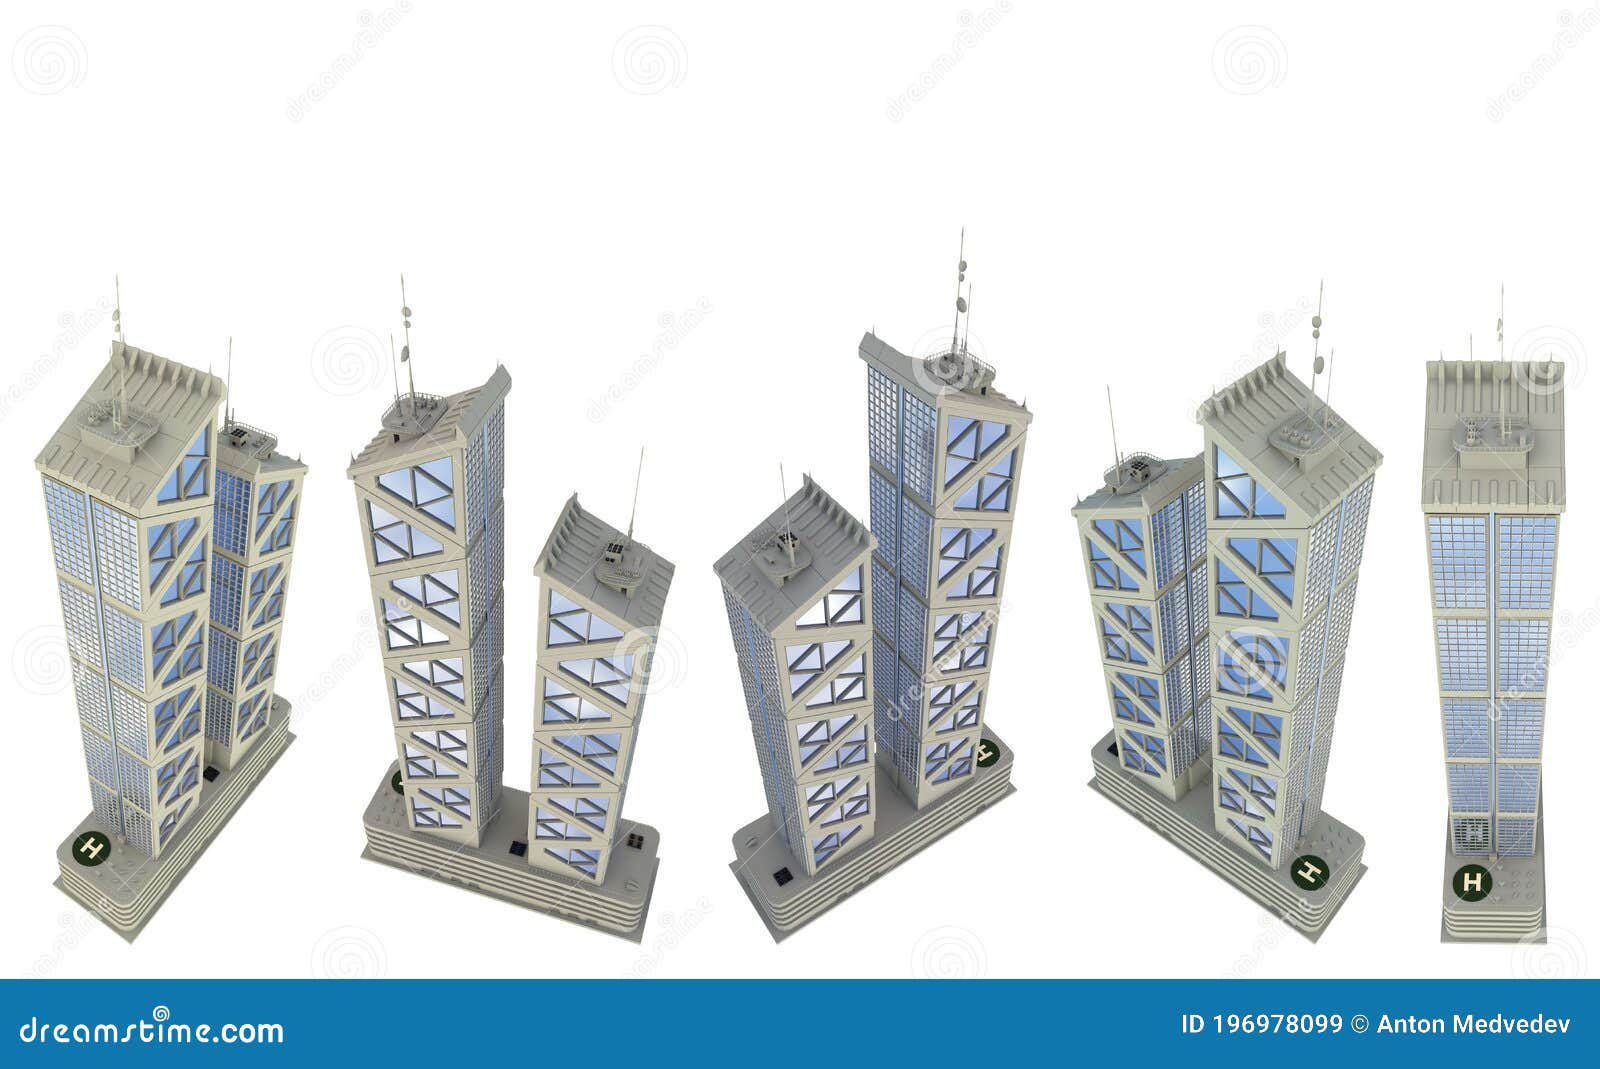 Set of 5 Renders of Fictional Design Financial Skyscrapers with Two